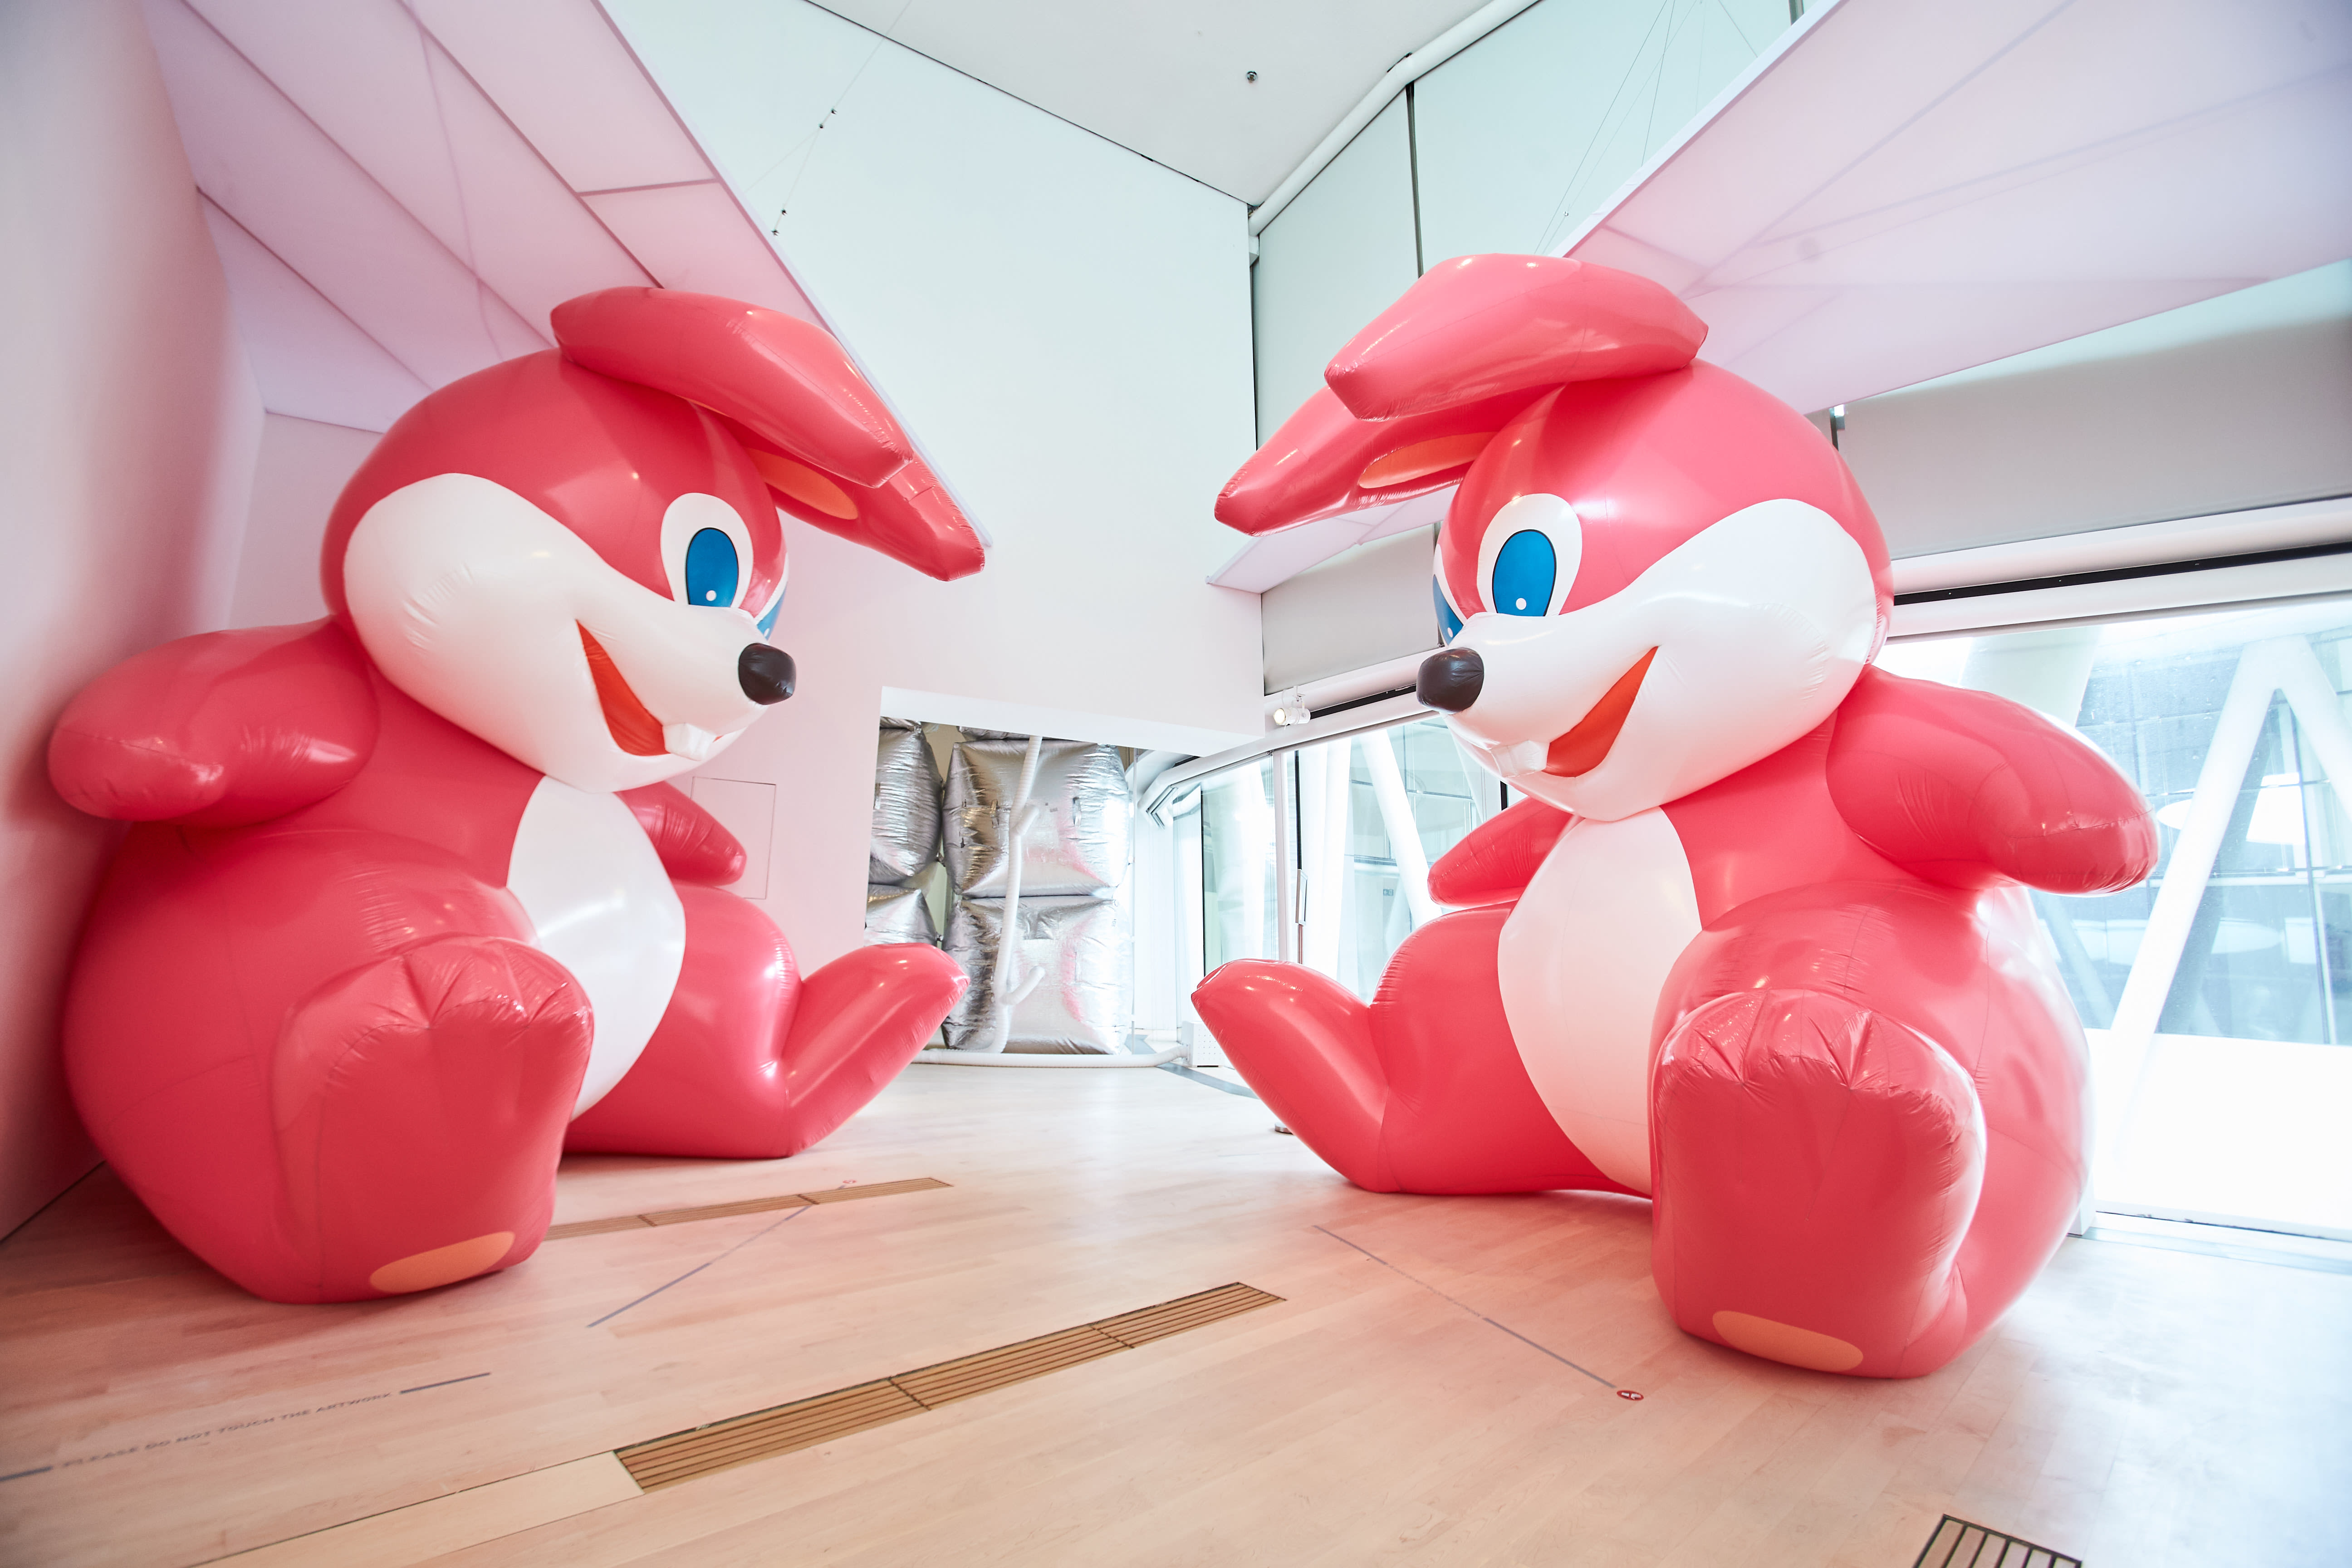 Giant Inflatables At ArtScience Museum’s ‘Floating Utopias' Exhibition —  And The Fascinating Stories Behind Them